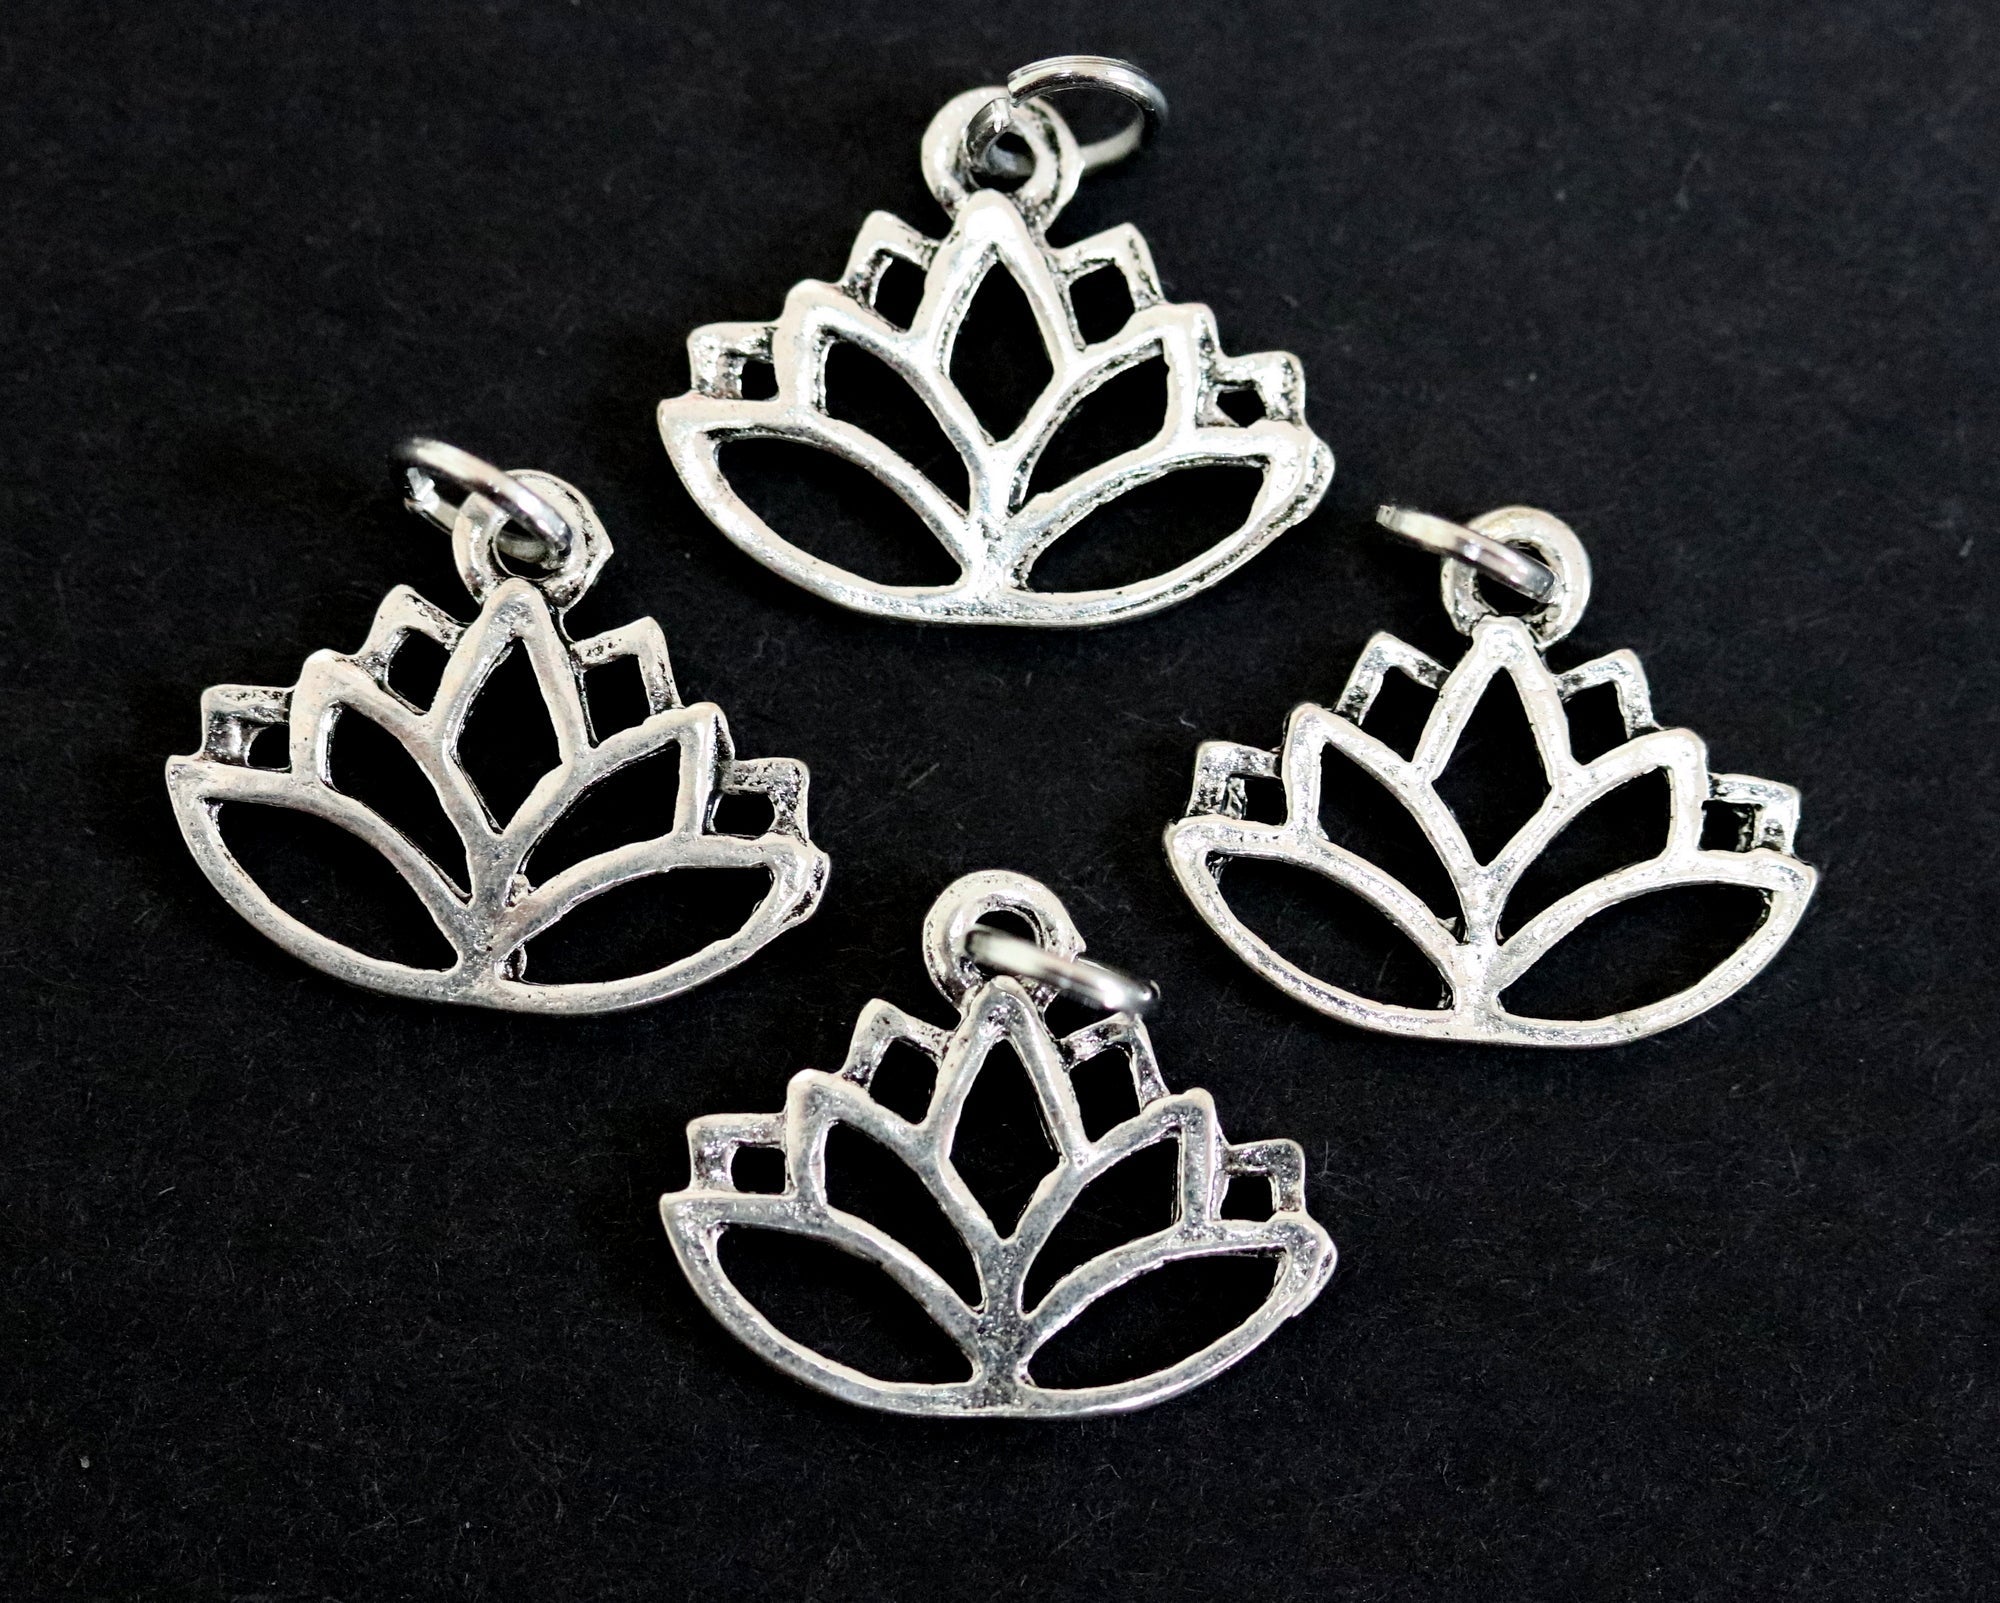 Lotus charm 14x16mm antique silver plated metal alloy pendant